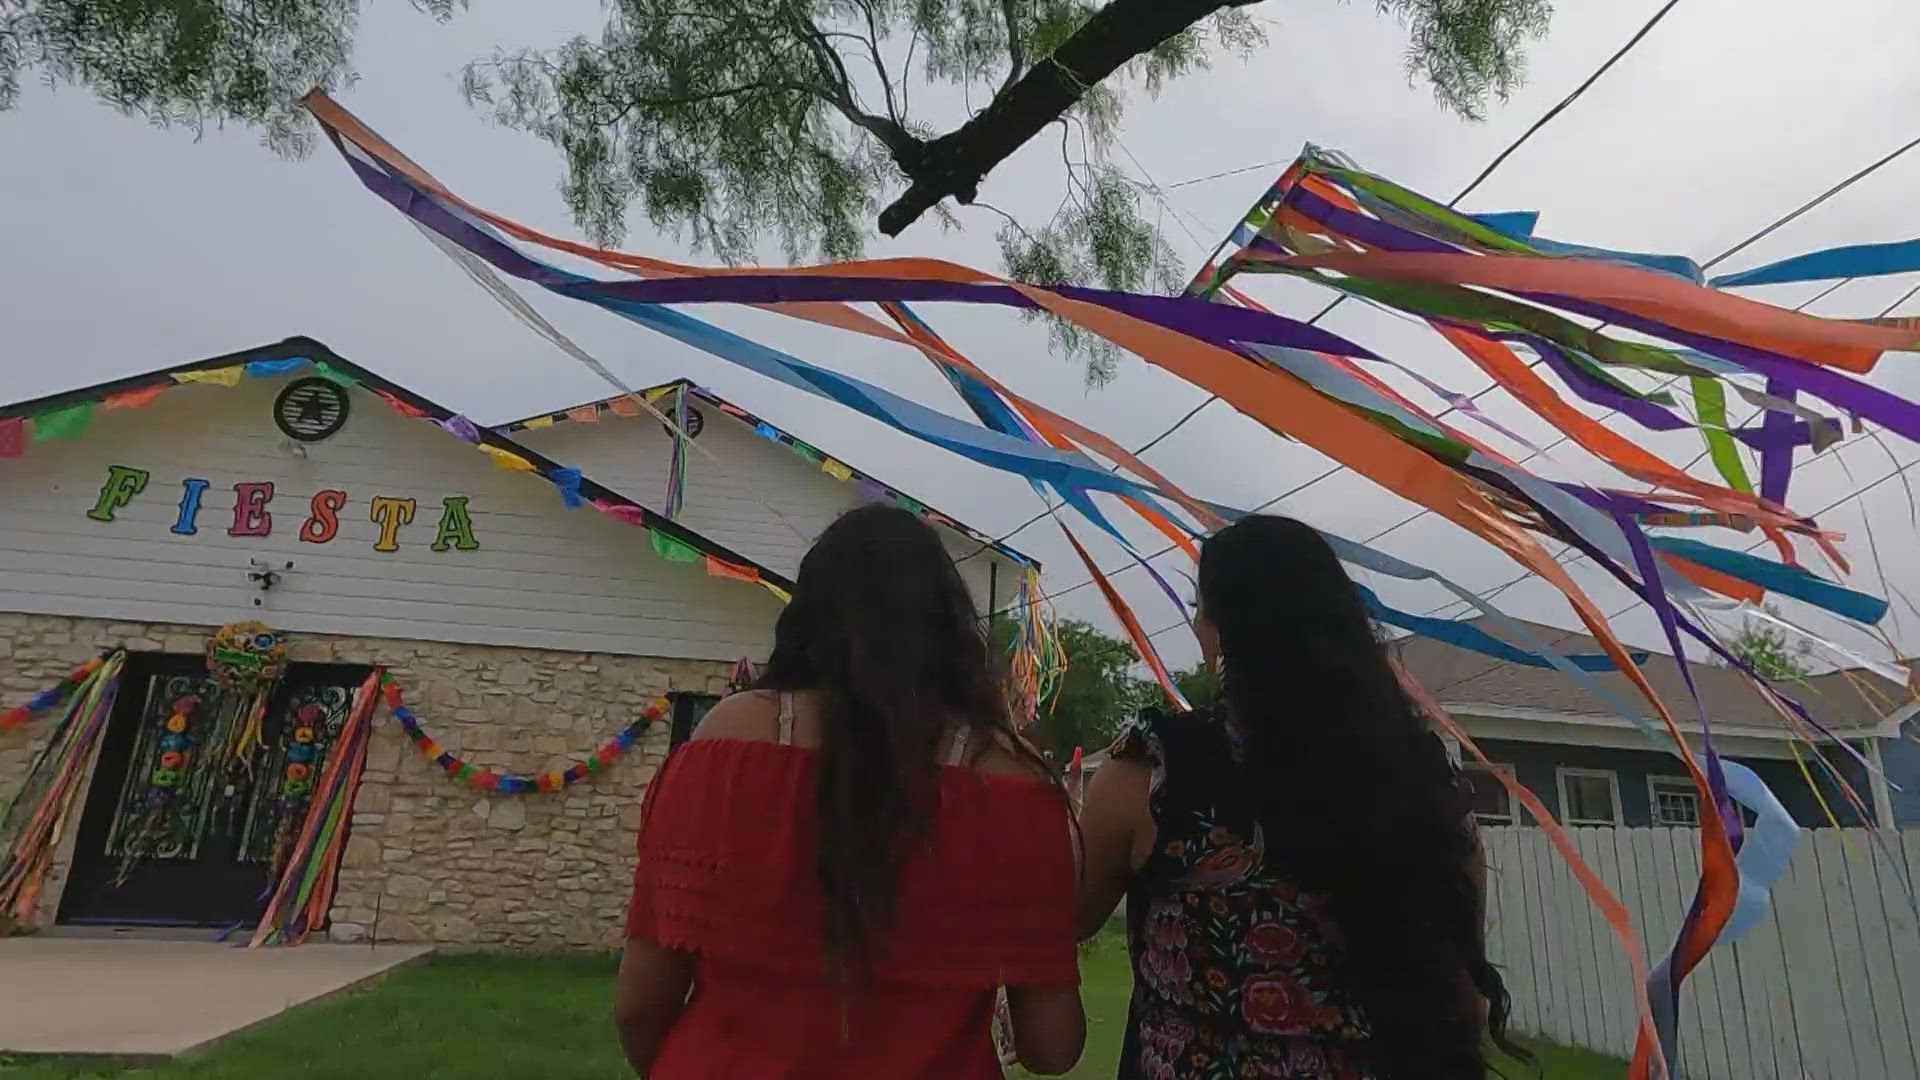 For the past five years, the Marquez family has decorated their home for Fiesta. But this year’s creation takes the cake.